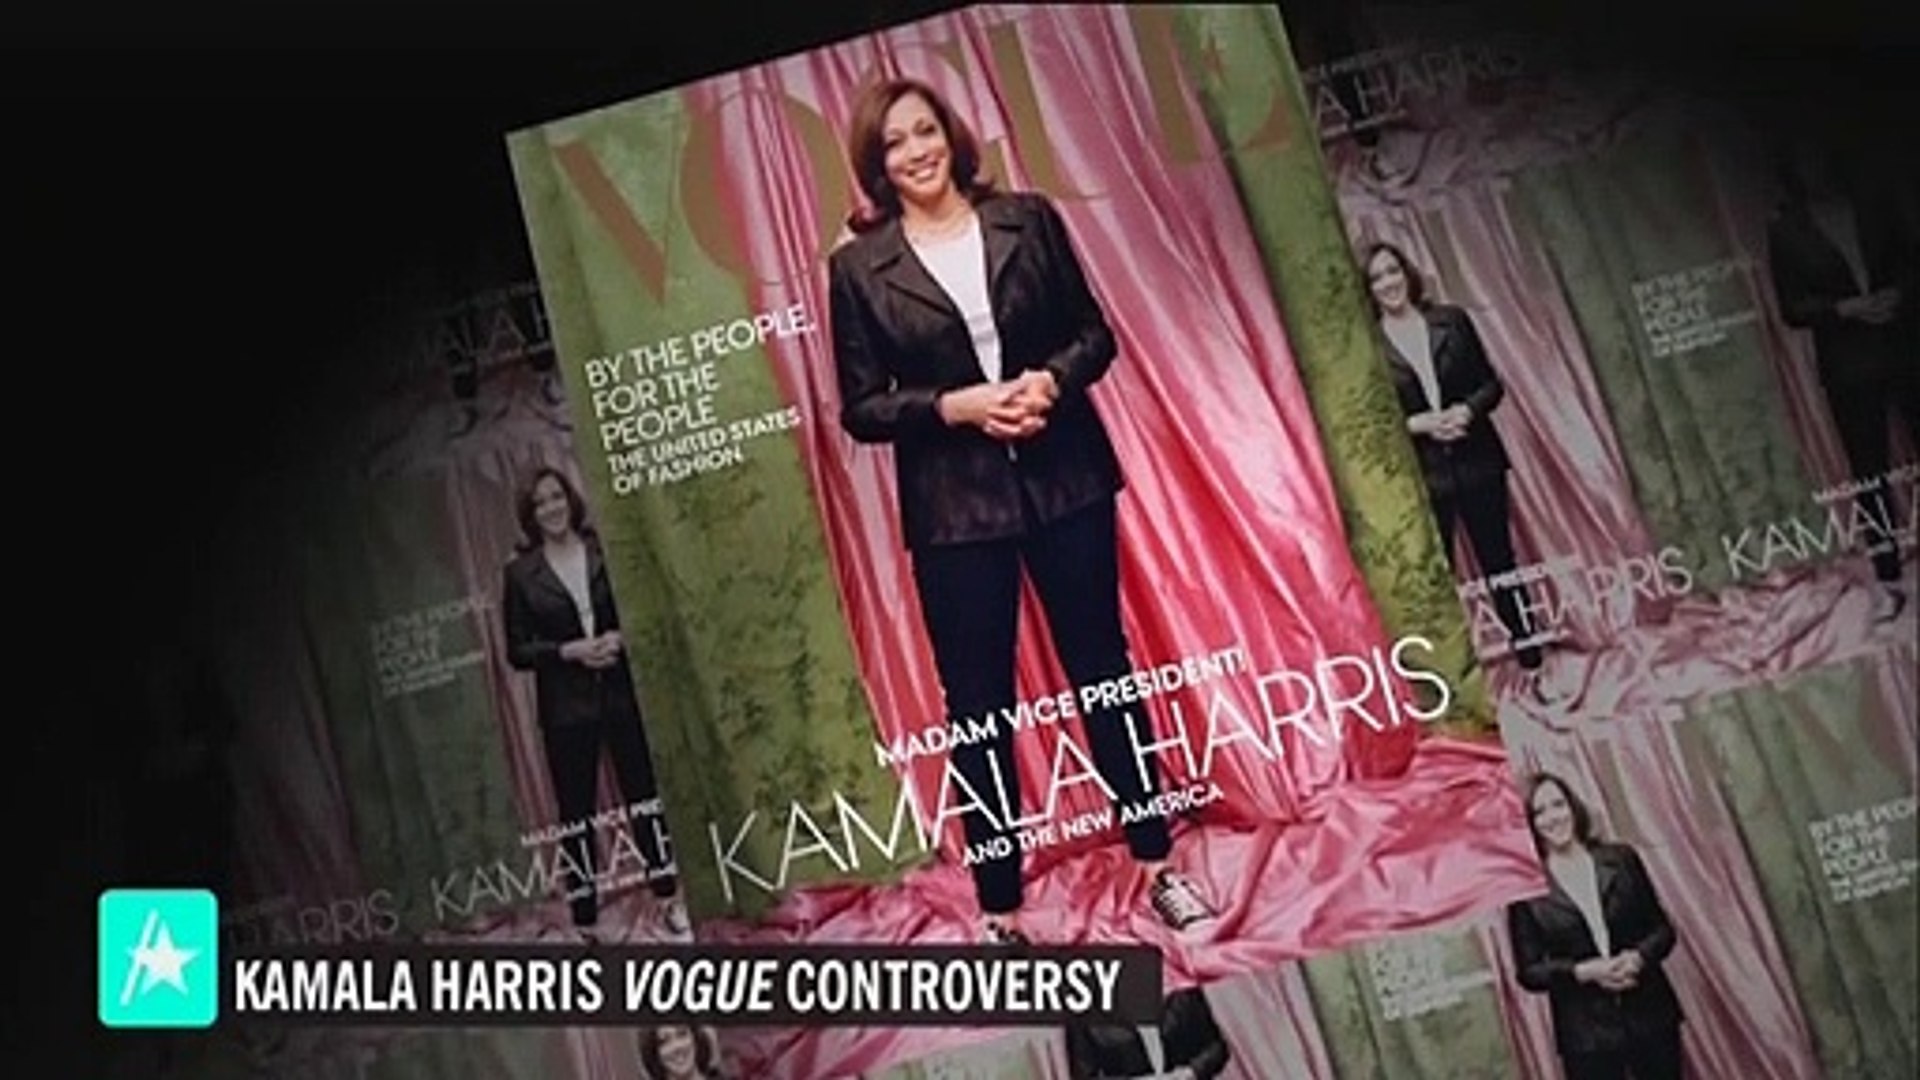 Vogue S Kamala Harris Cover Sparks Controversy Video Dailymotion